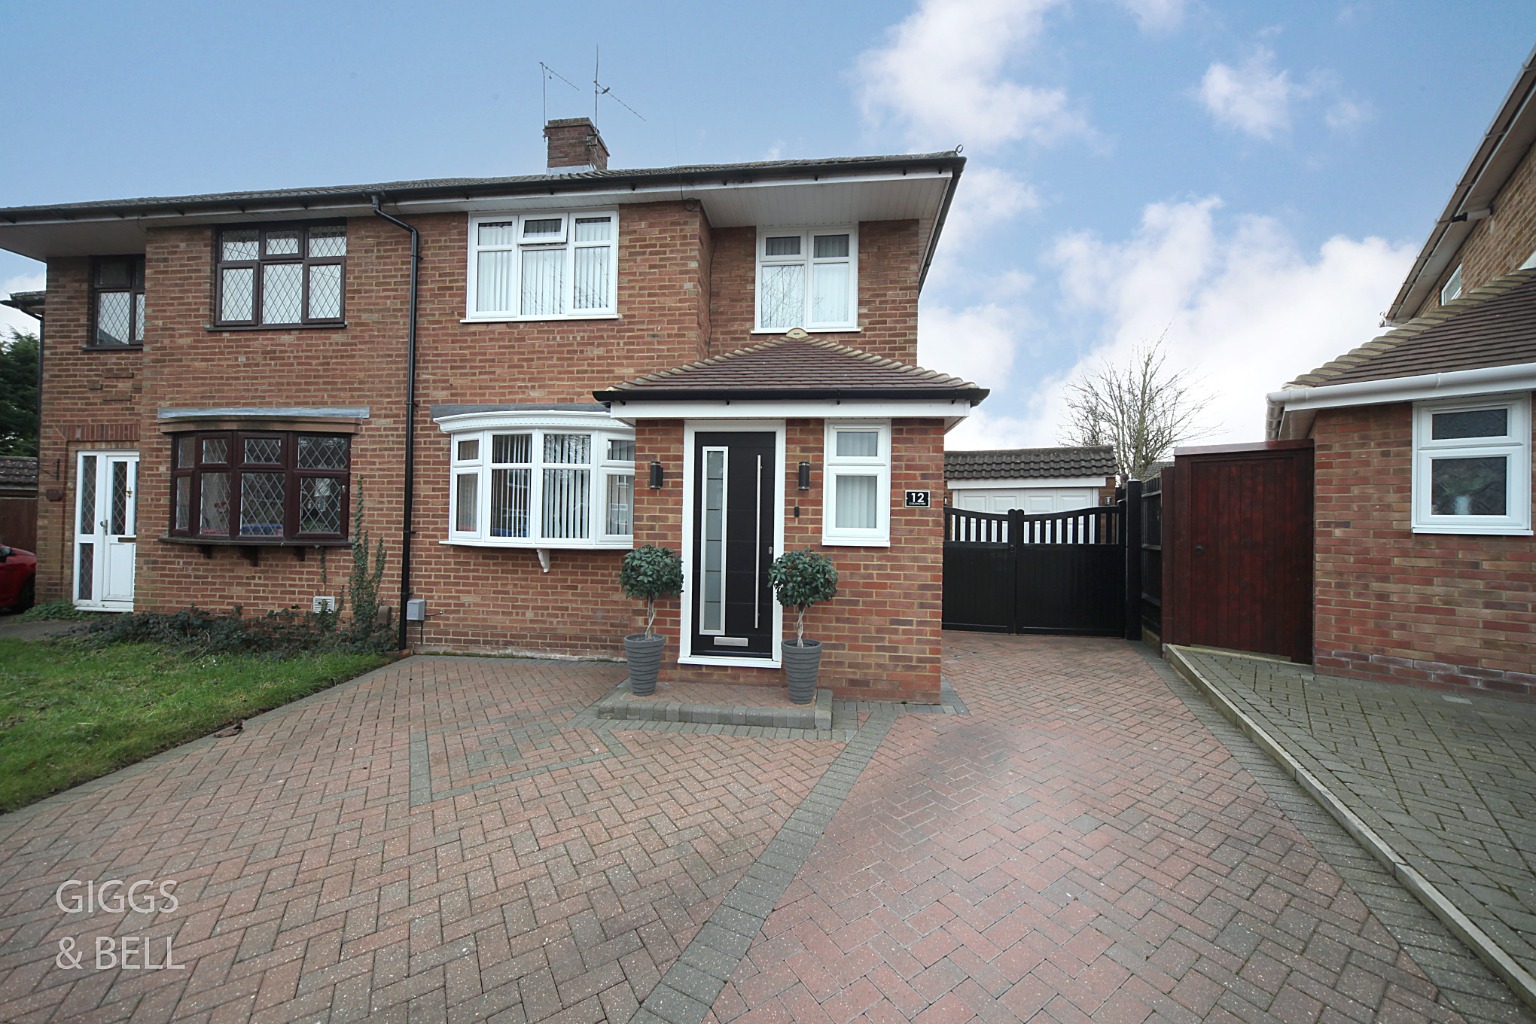 3 bed semi-detached house for sale in Collingtree, Luton - Property Image 1